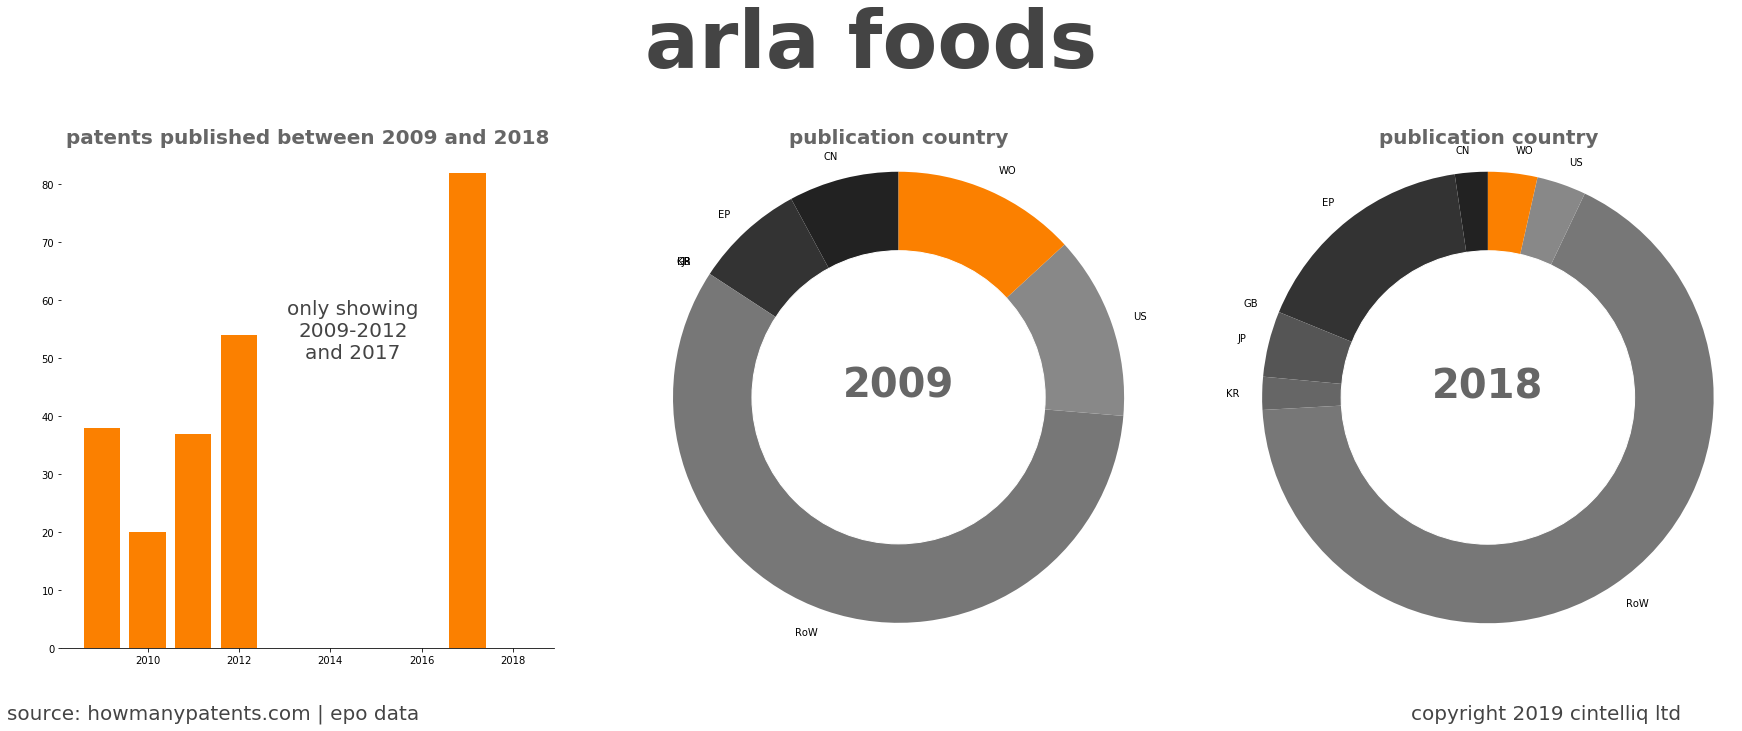 summary of patents for Arla Foods